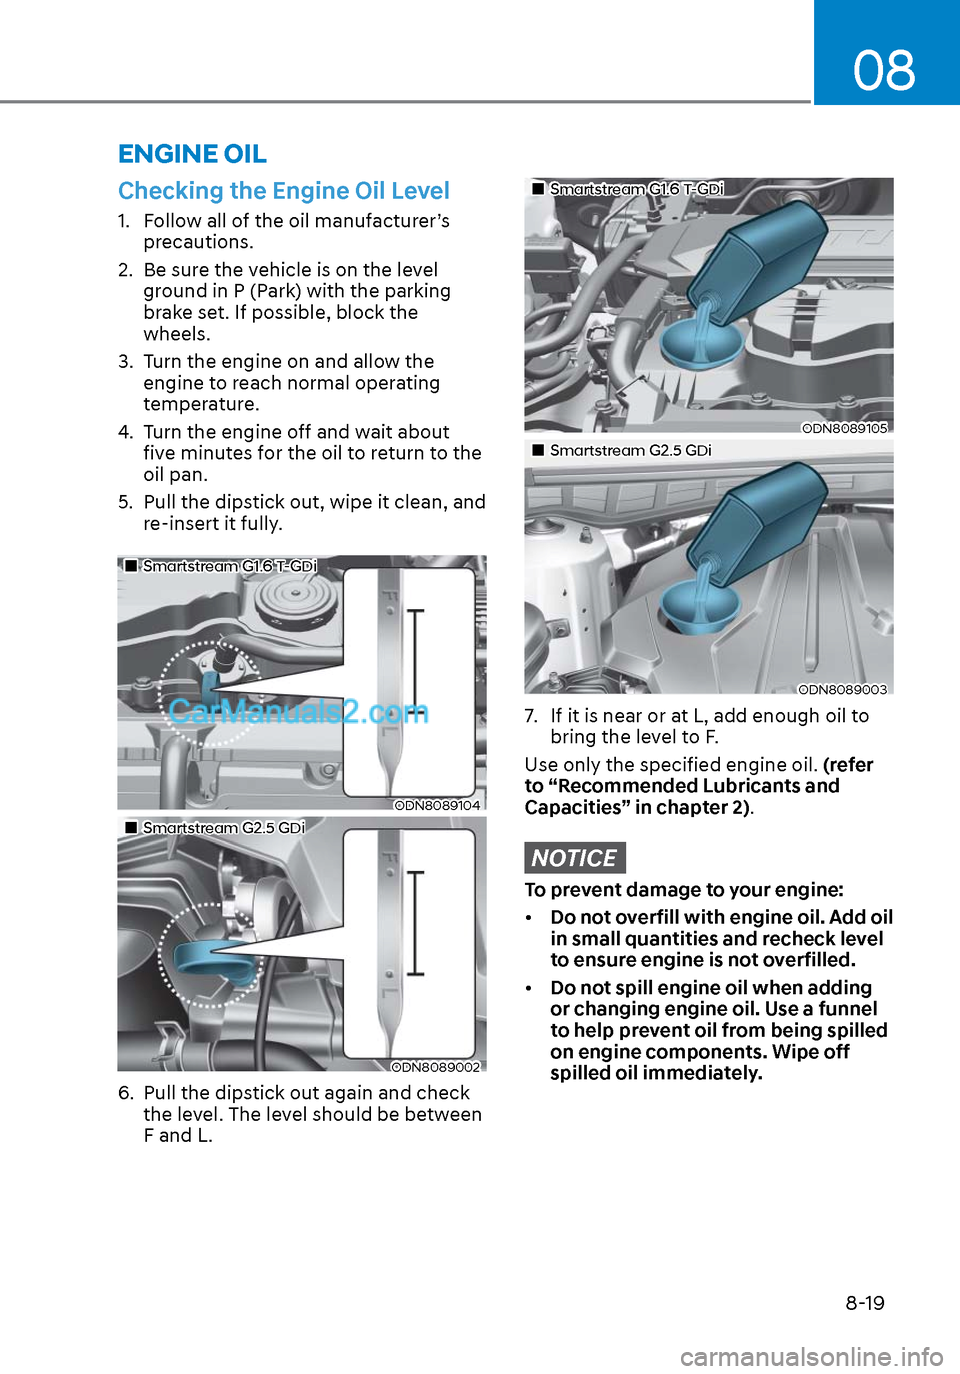 Hyundai Sonata 2020 User Guide 08
8-19
Checking the Engine Oil Level
1.  Follow all of the oil manufacturer’s precautions.
2.  Be sure the vehicle is on the level  ground in P (Park) with the parking 
brake set. If possible, bloc